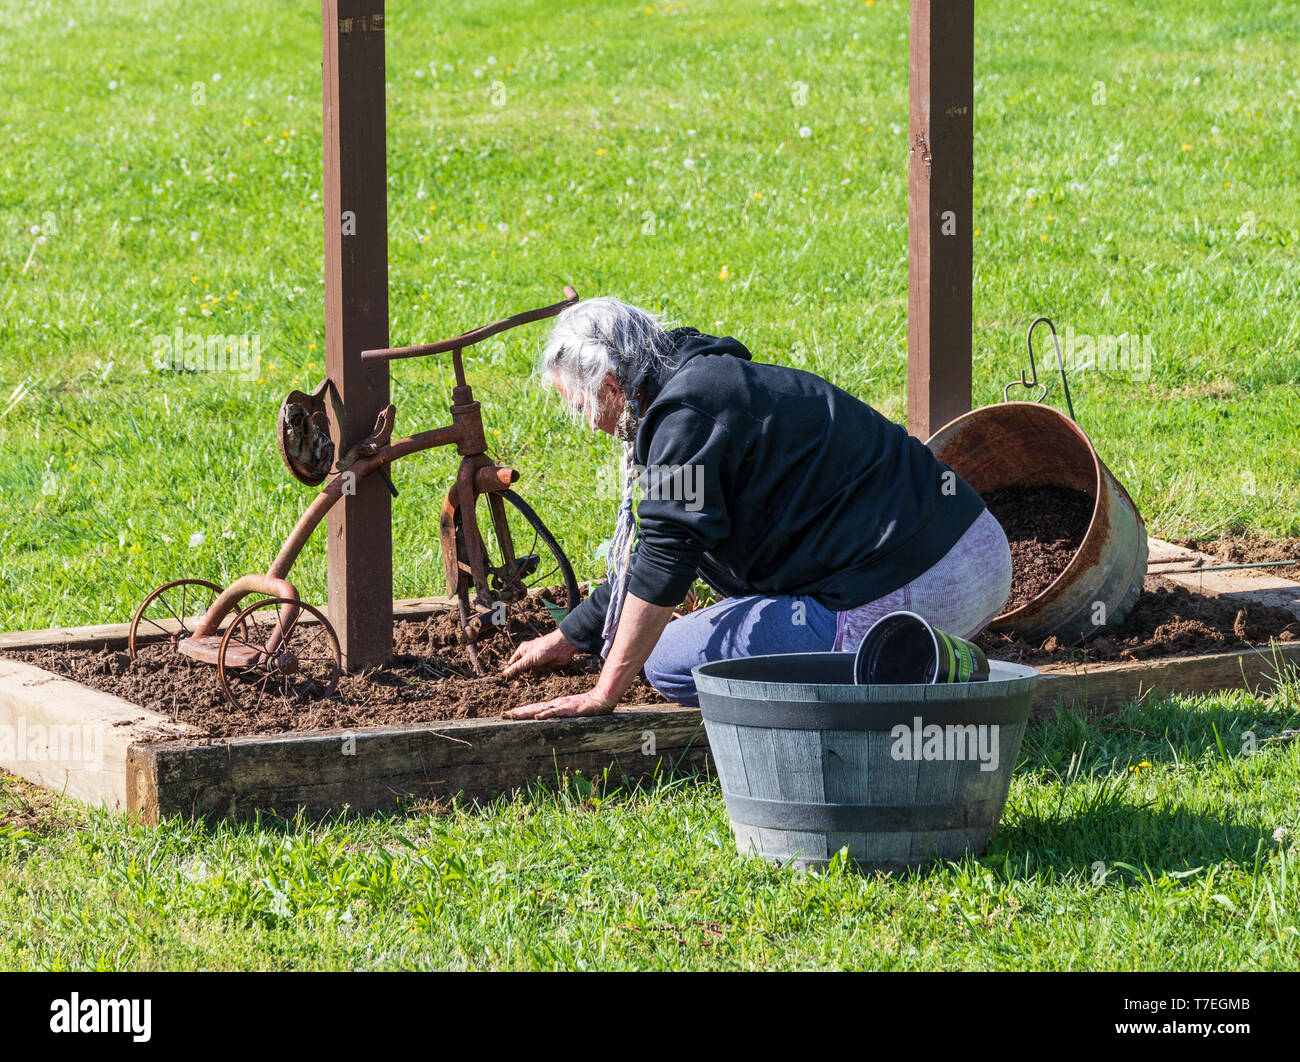 LIMESTONE, TN, USA-4/26/19:  Senior woman digging in flower box, with rusted old tricycle as an ornament. Stock Photo